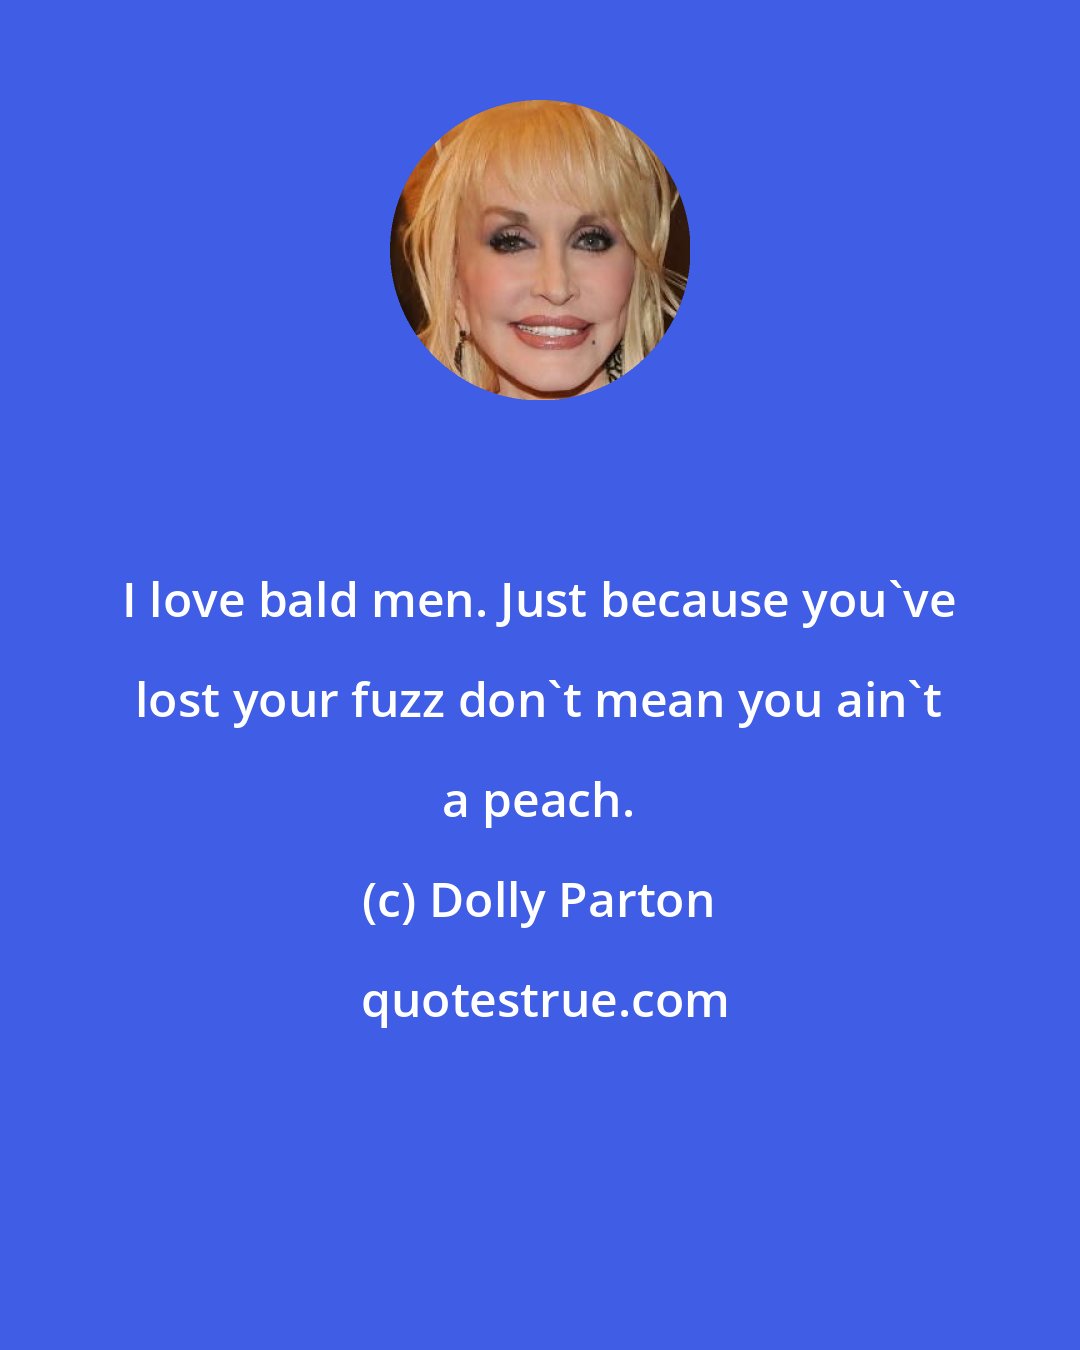 Dolly Parton: I love bald men. Just because you've lost your fuzz don't mean you ain't a peach.